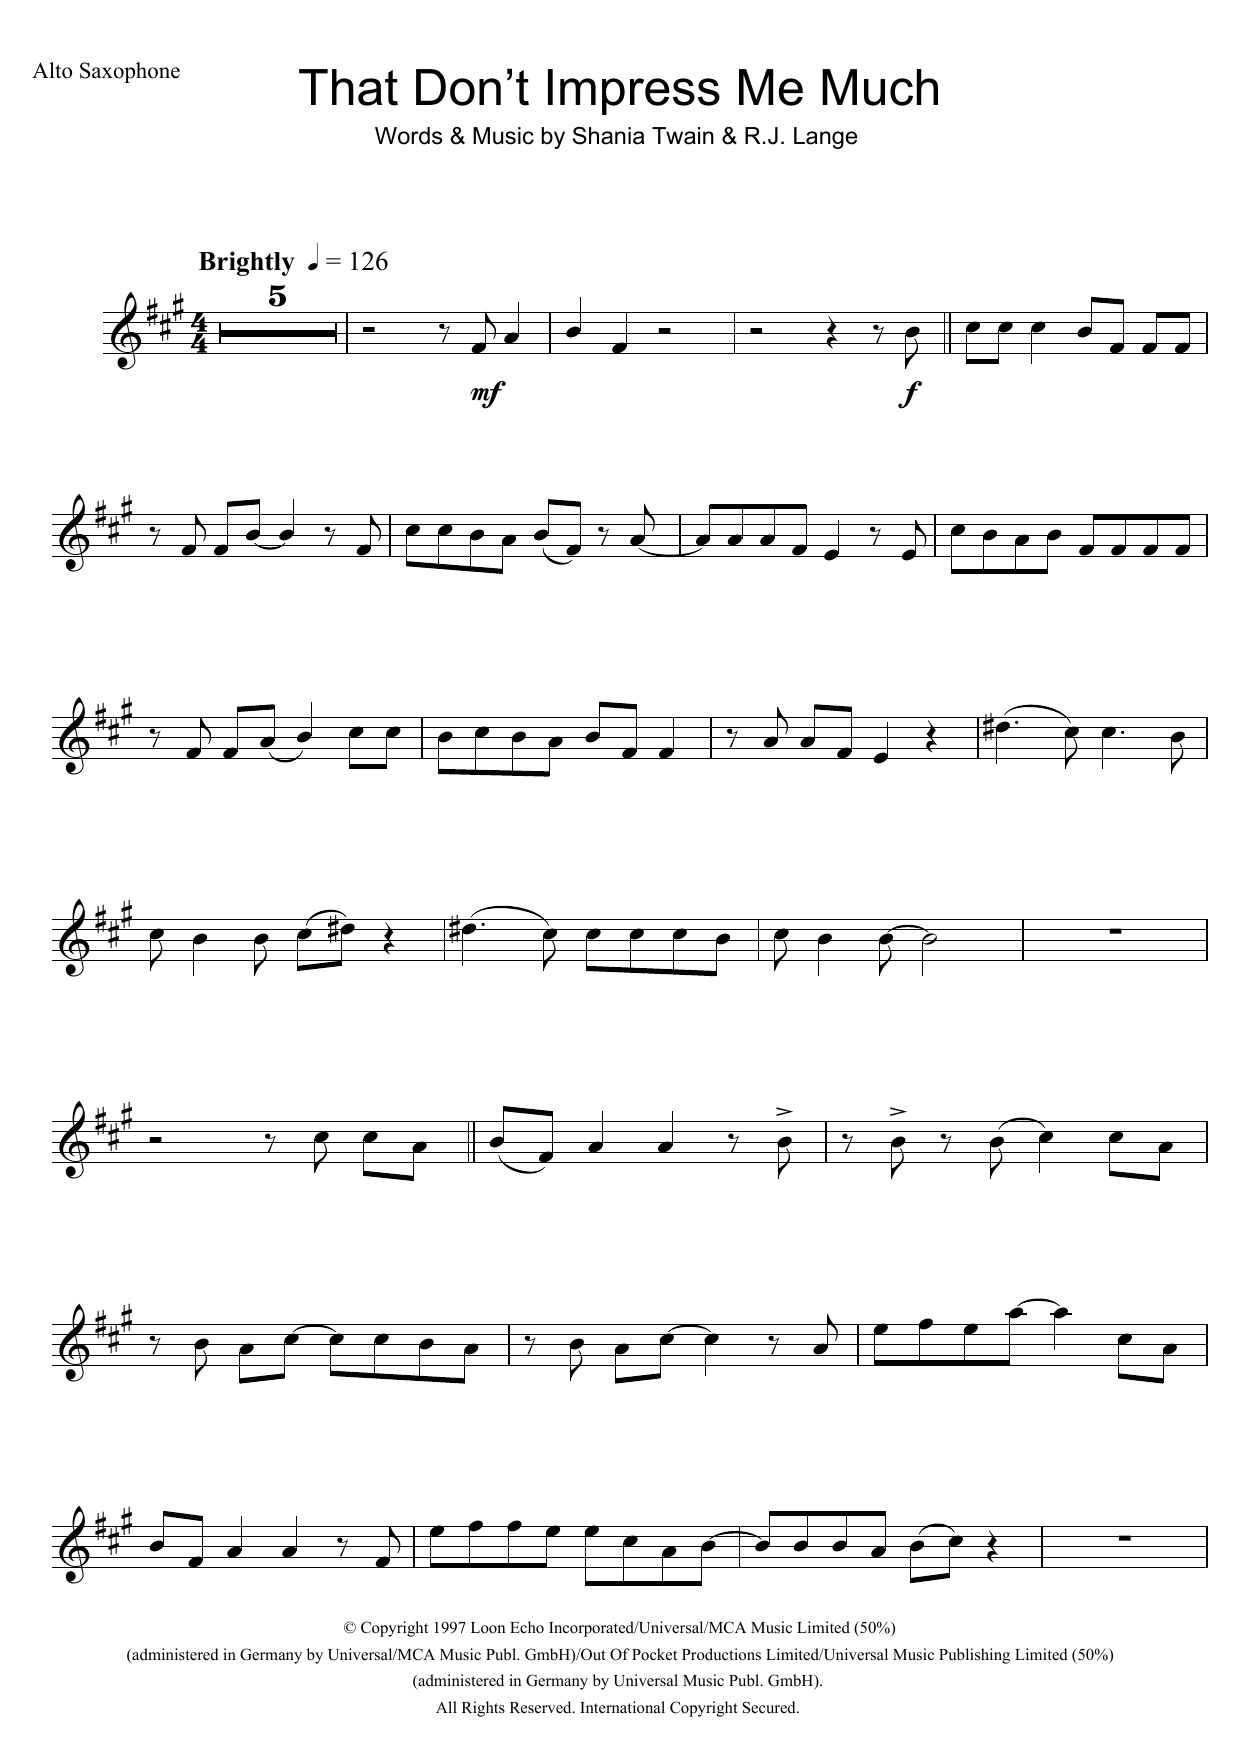 Download Shania Twain That Don't Impress Me Much Sheet Music